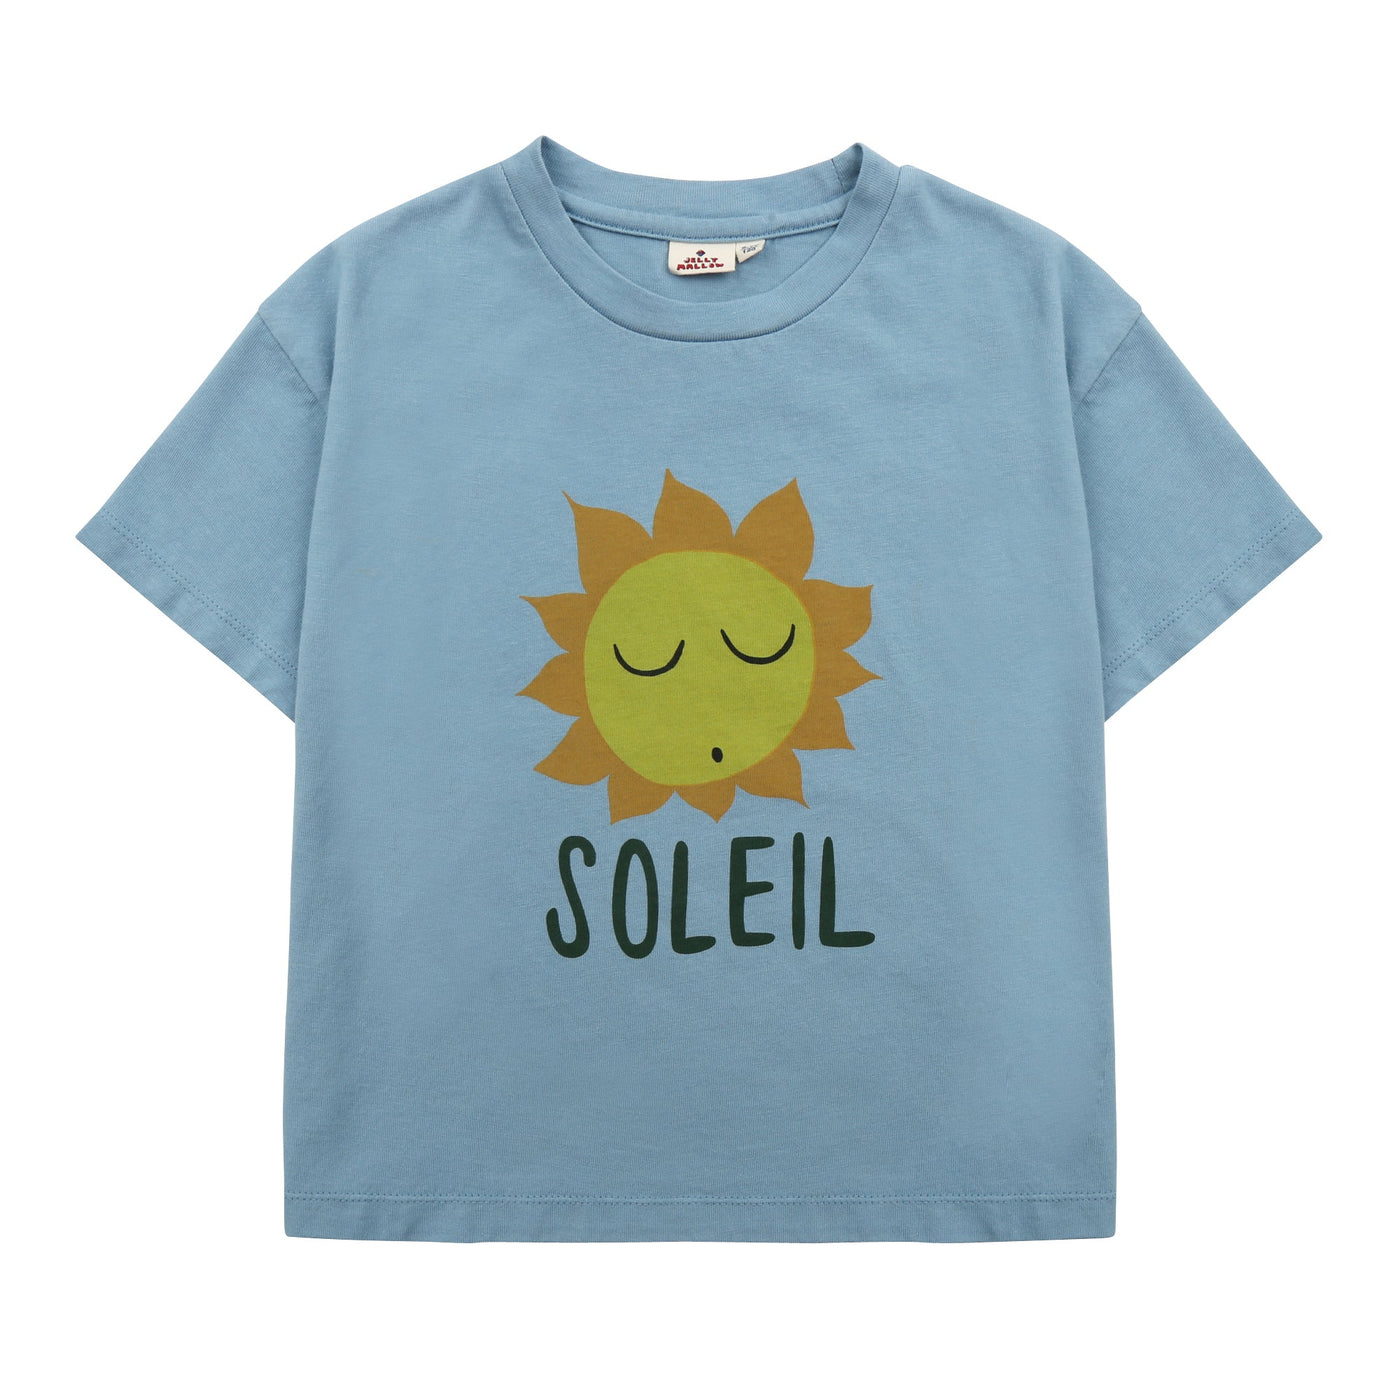 Soleil Tee by Jelly Mallow - Petite Belle